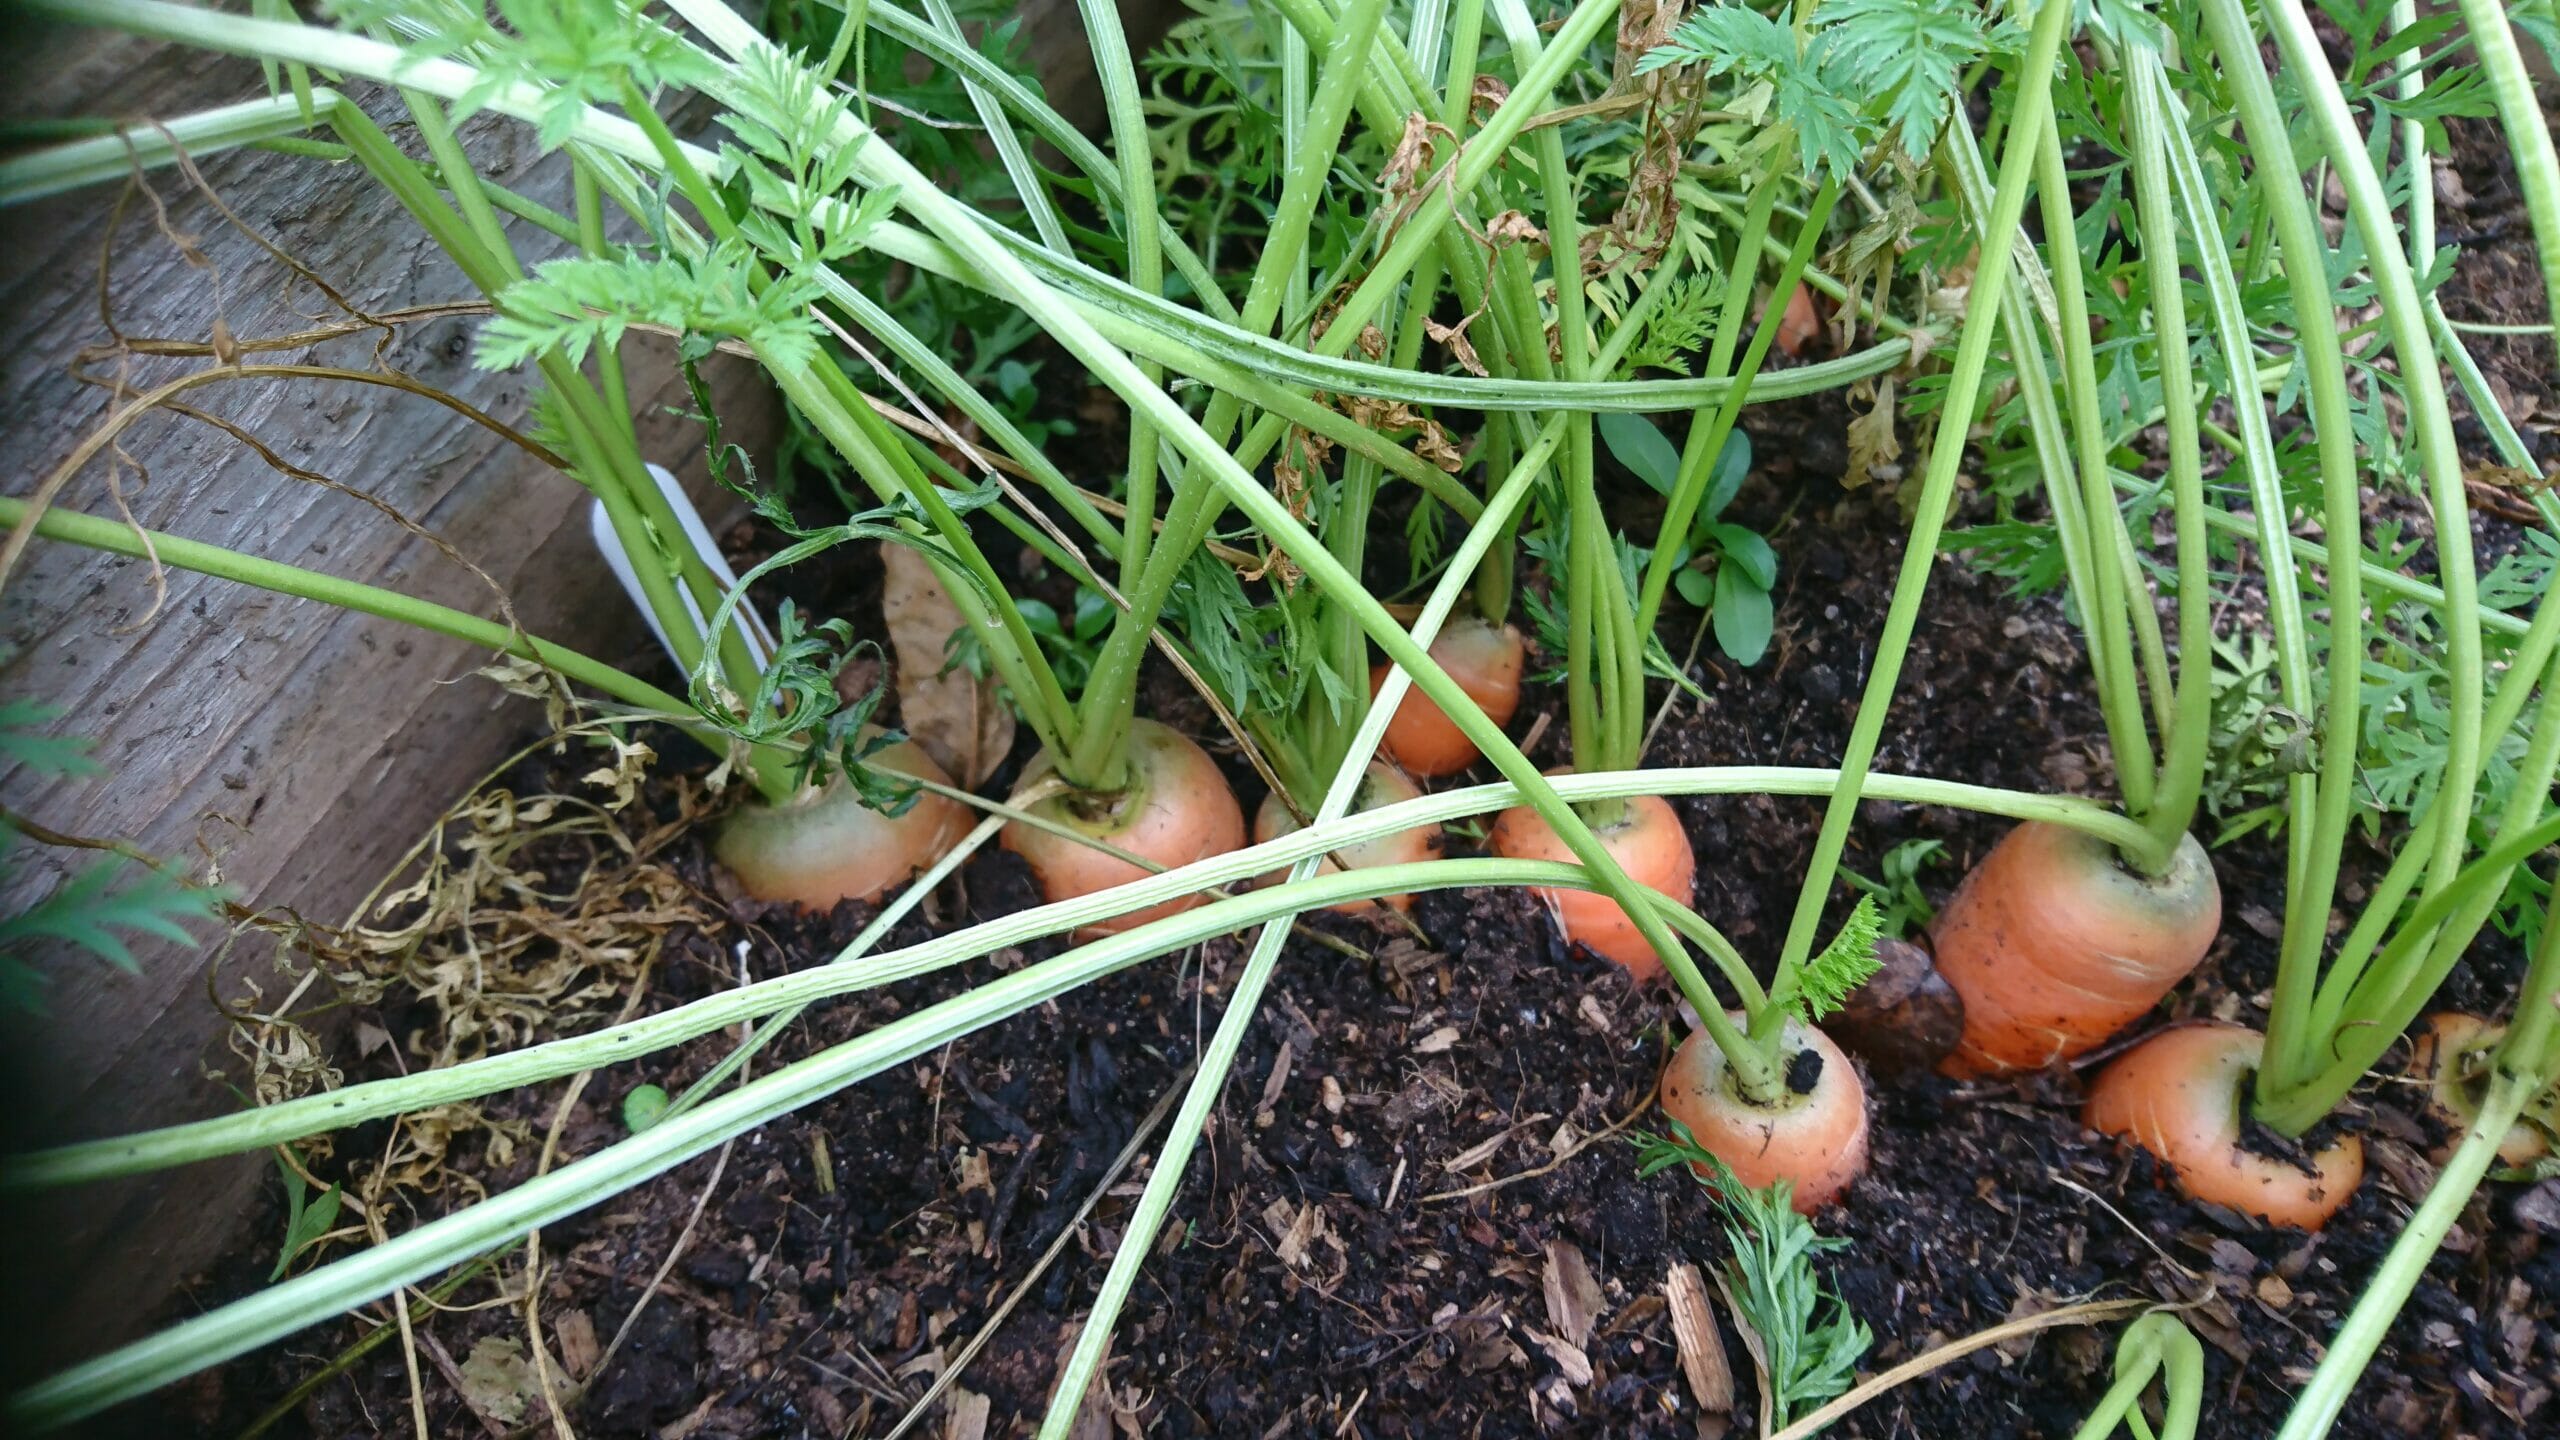 June – What To Do In The Vegetable Garden